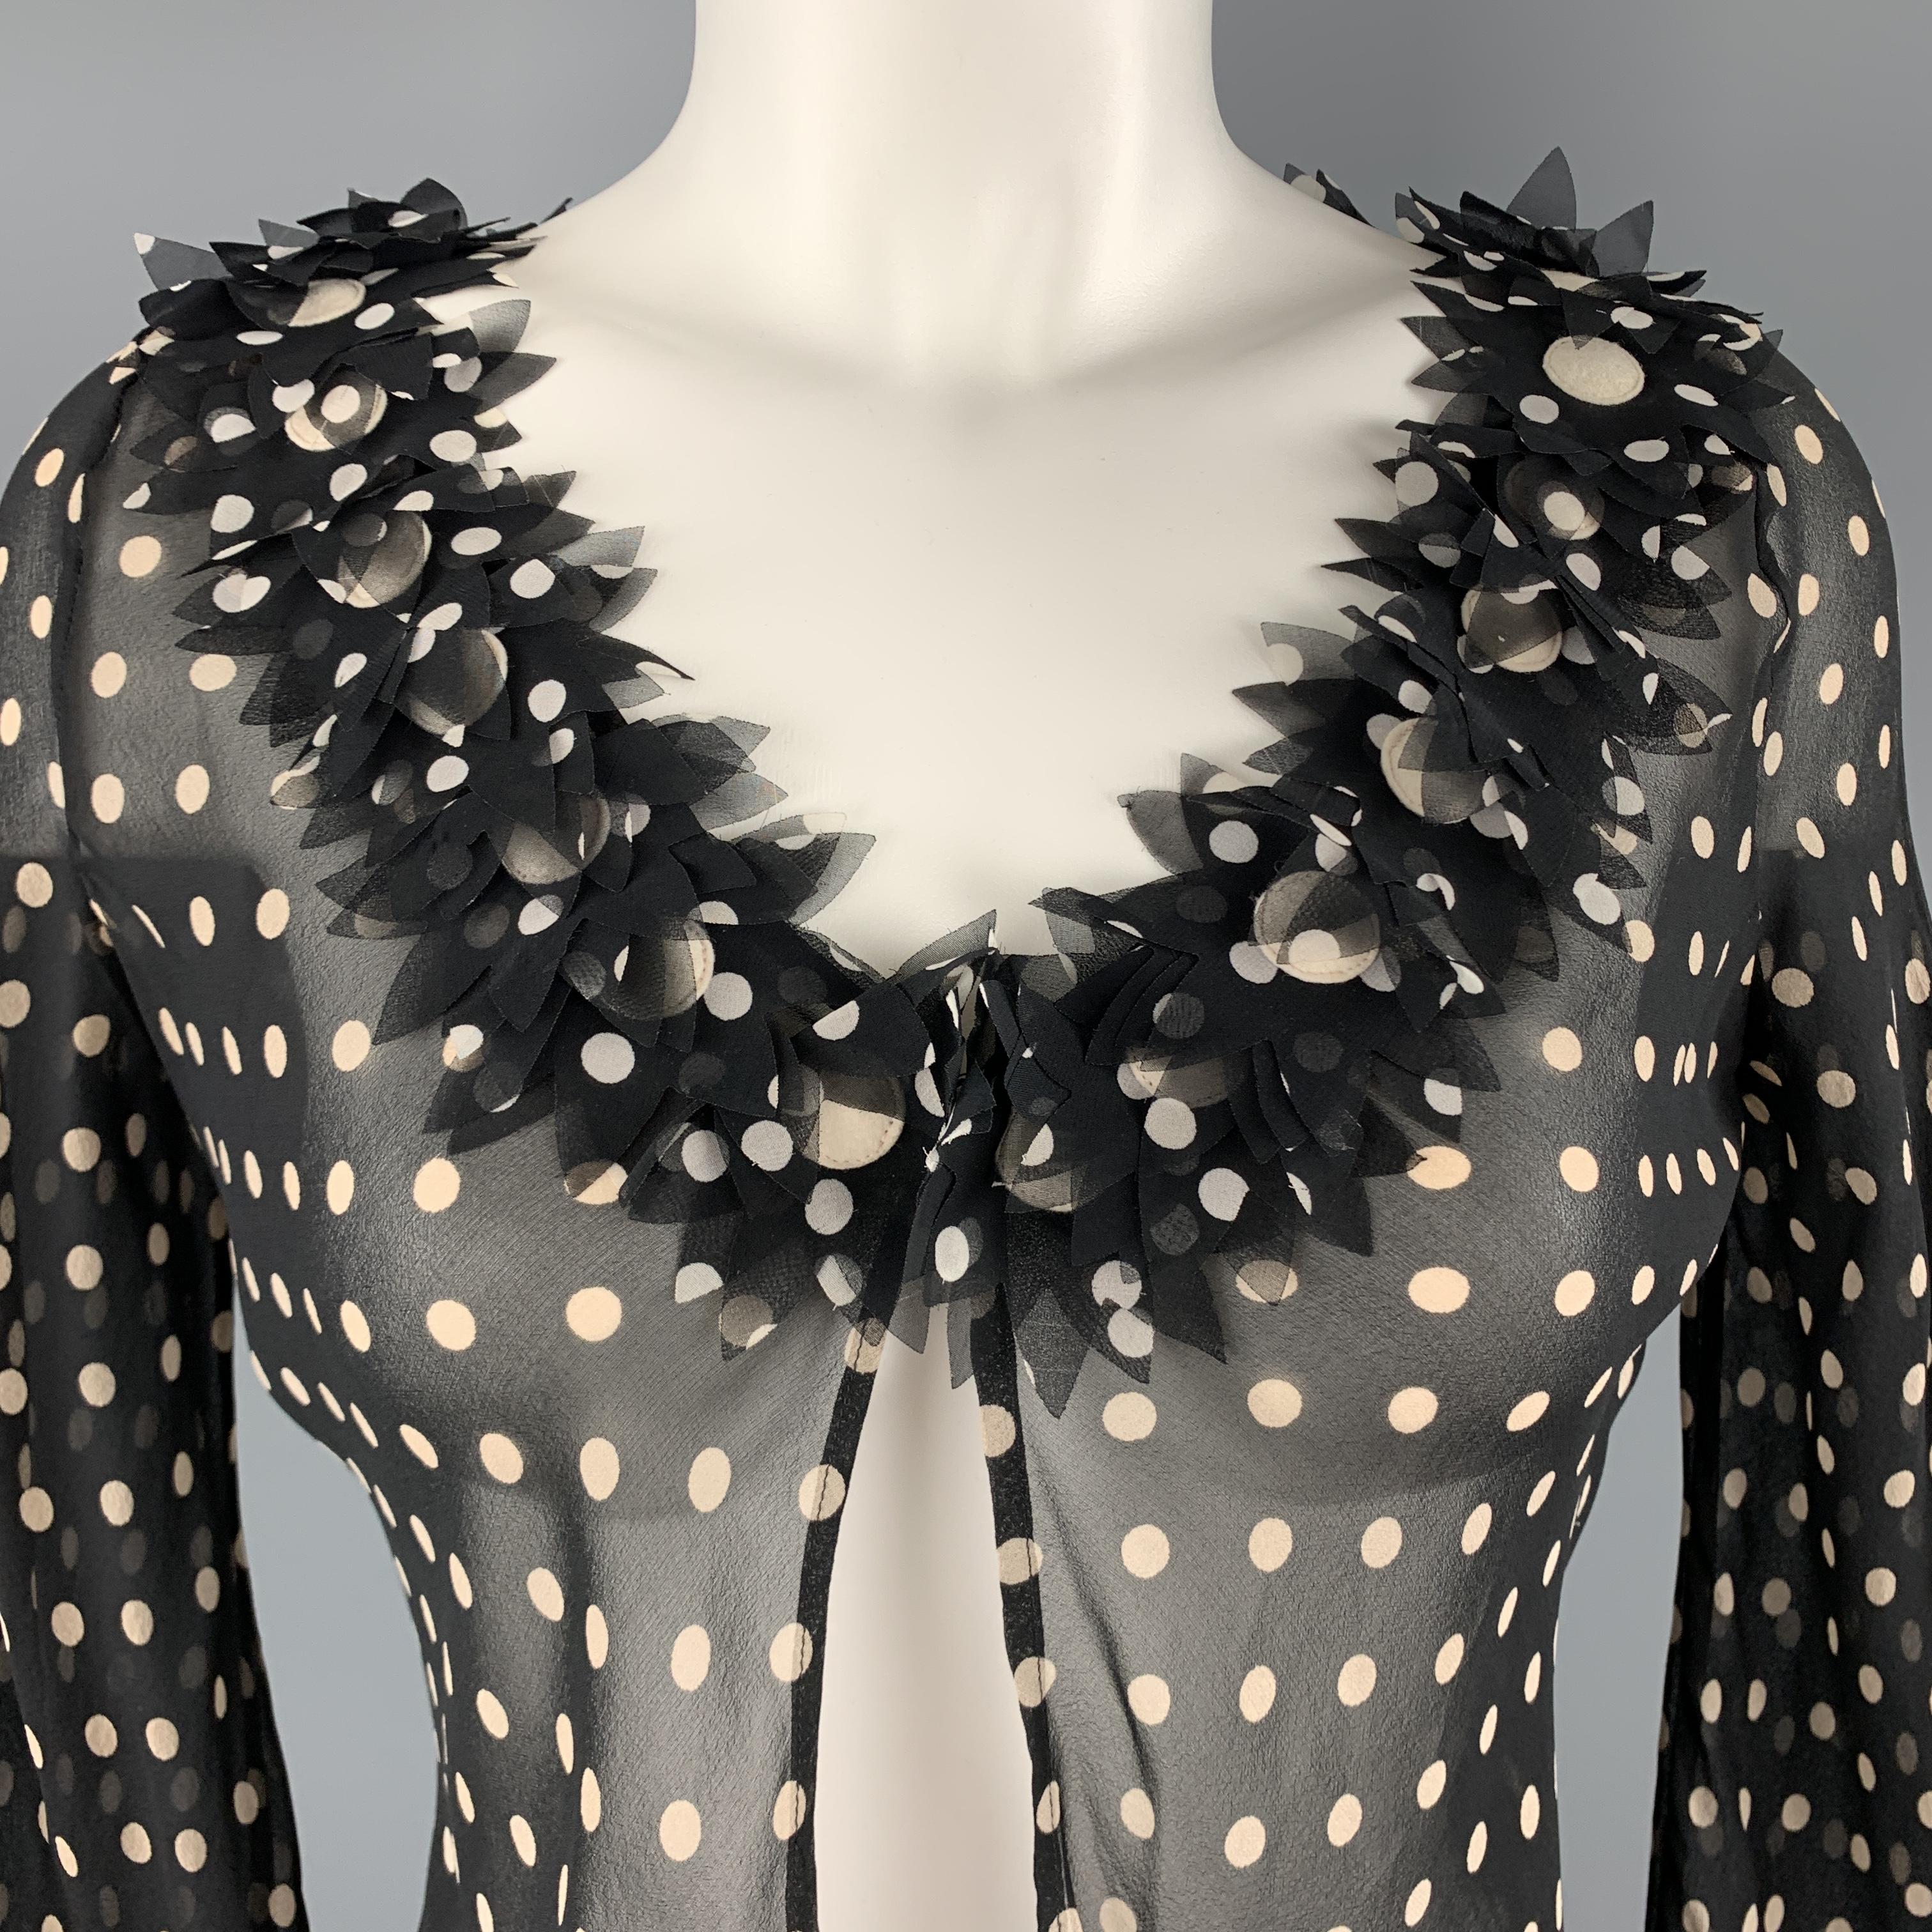 MOSCHINO CHEAP AND CHIC cardigan blouse comes in black an cream polka dot silk with a single hook closure, detailed with floral appliques. Matching camisole seperate. Made in Italy.

Excellent Pre-Owned Condition.
Marked: 8

Measurements:

Shoulder: